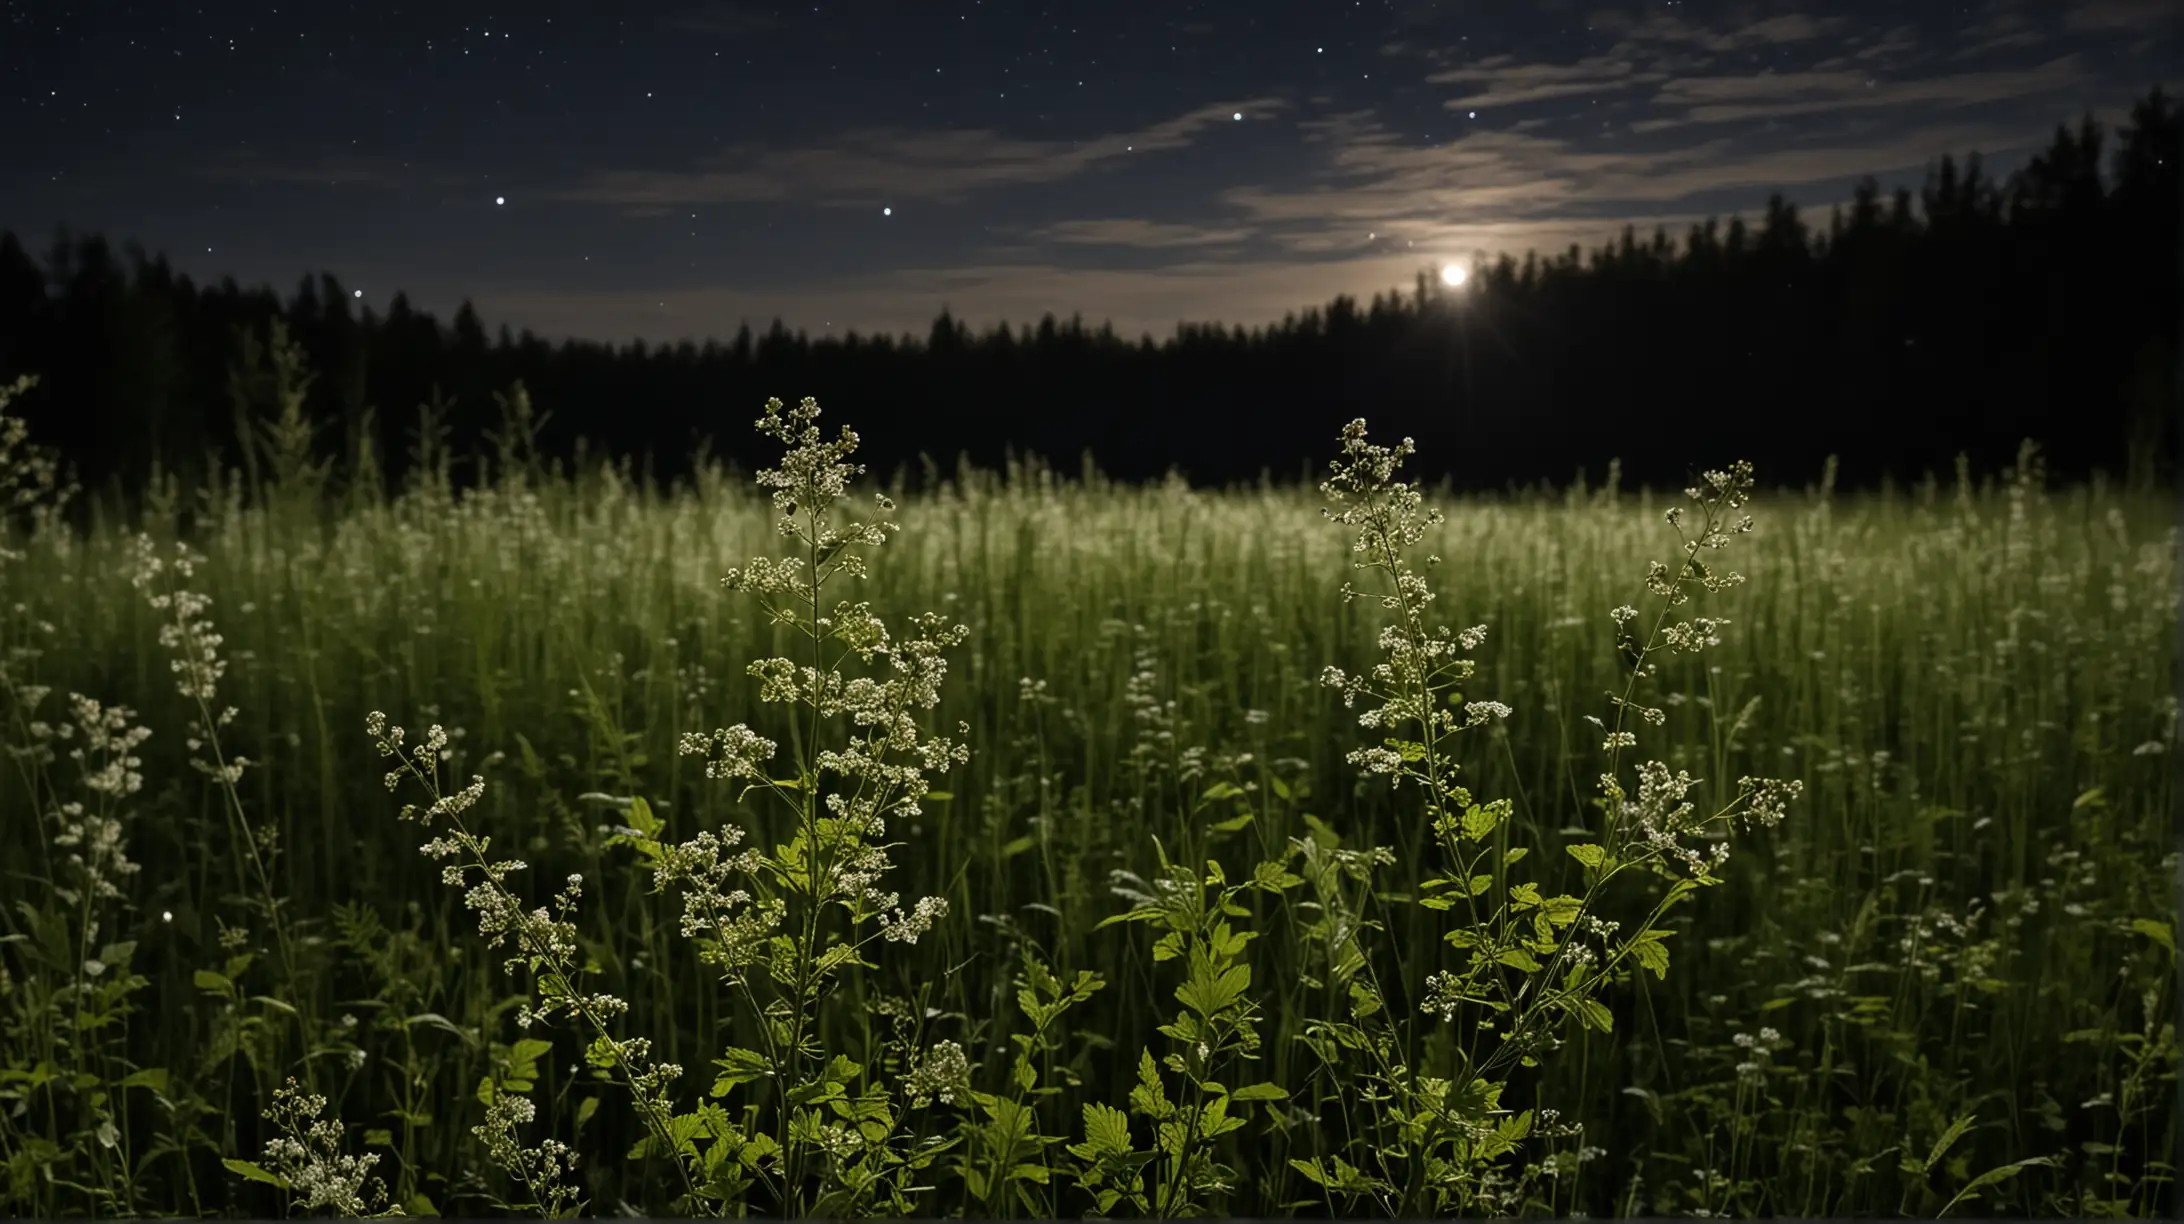 Crisp Meadowsweet in Nighttime Ambiance with Field and Forest